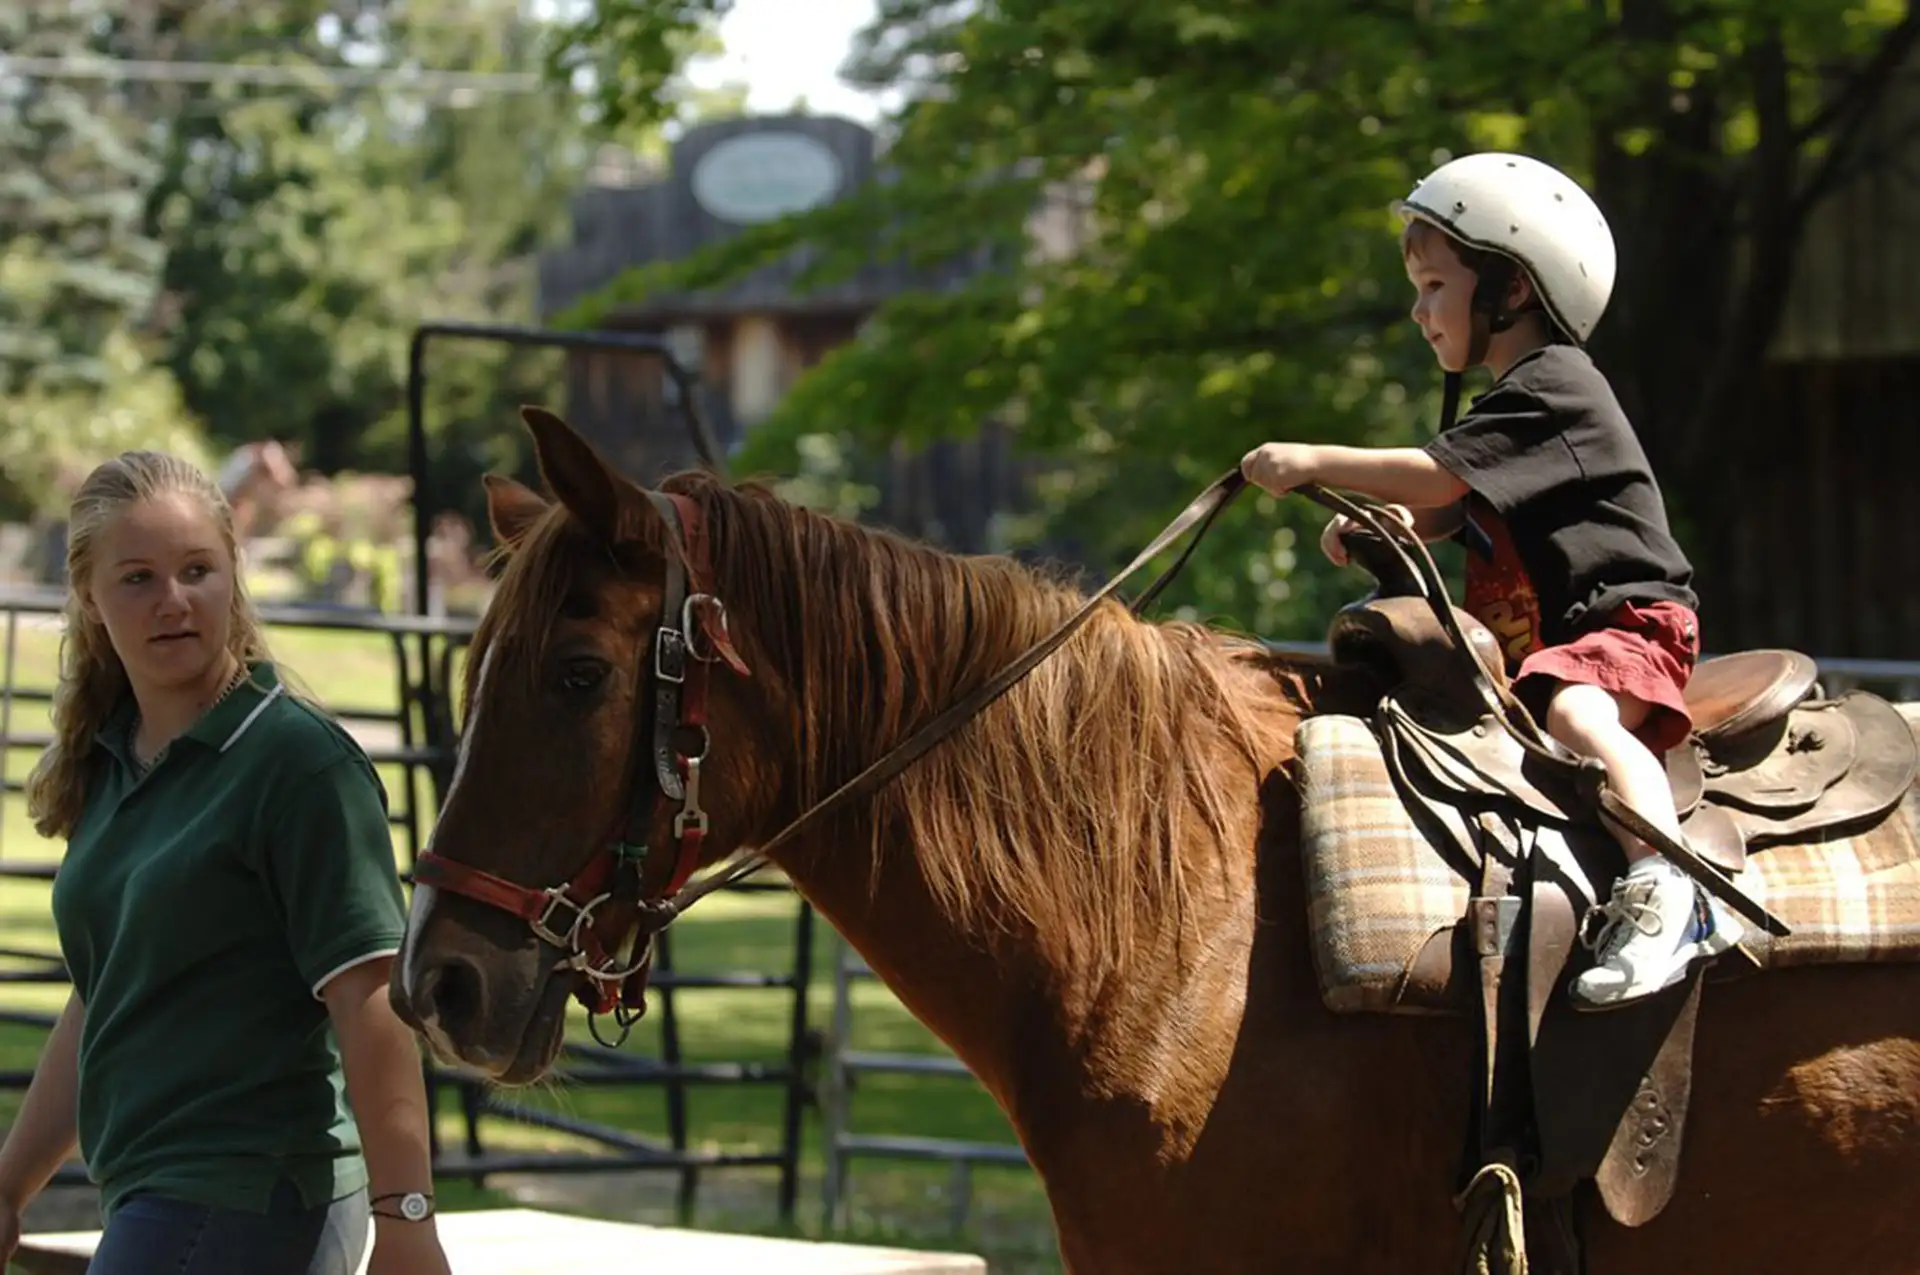 Child on Pony Ride at Pine Ridge Dude Ranch in New York